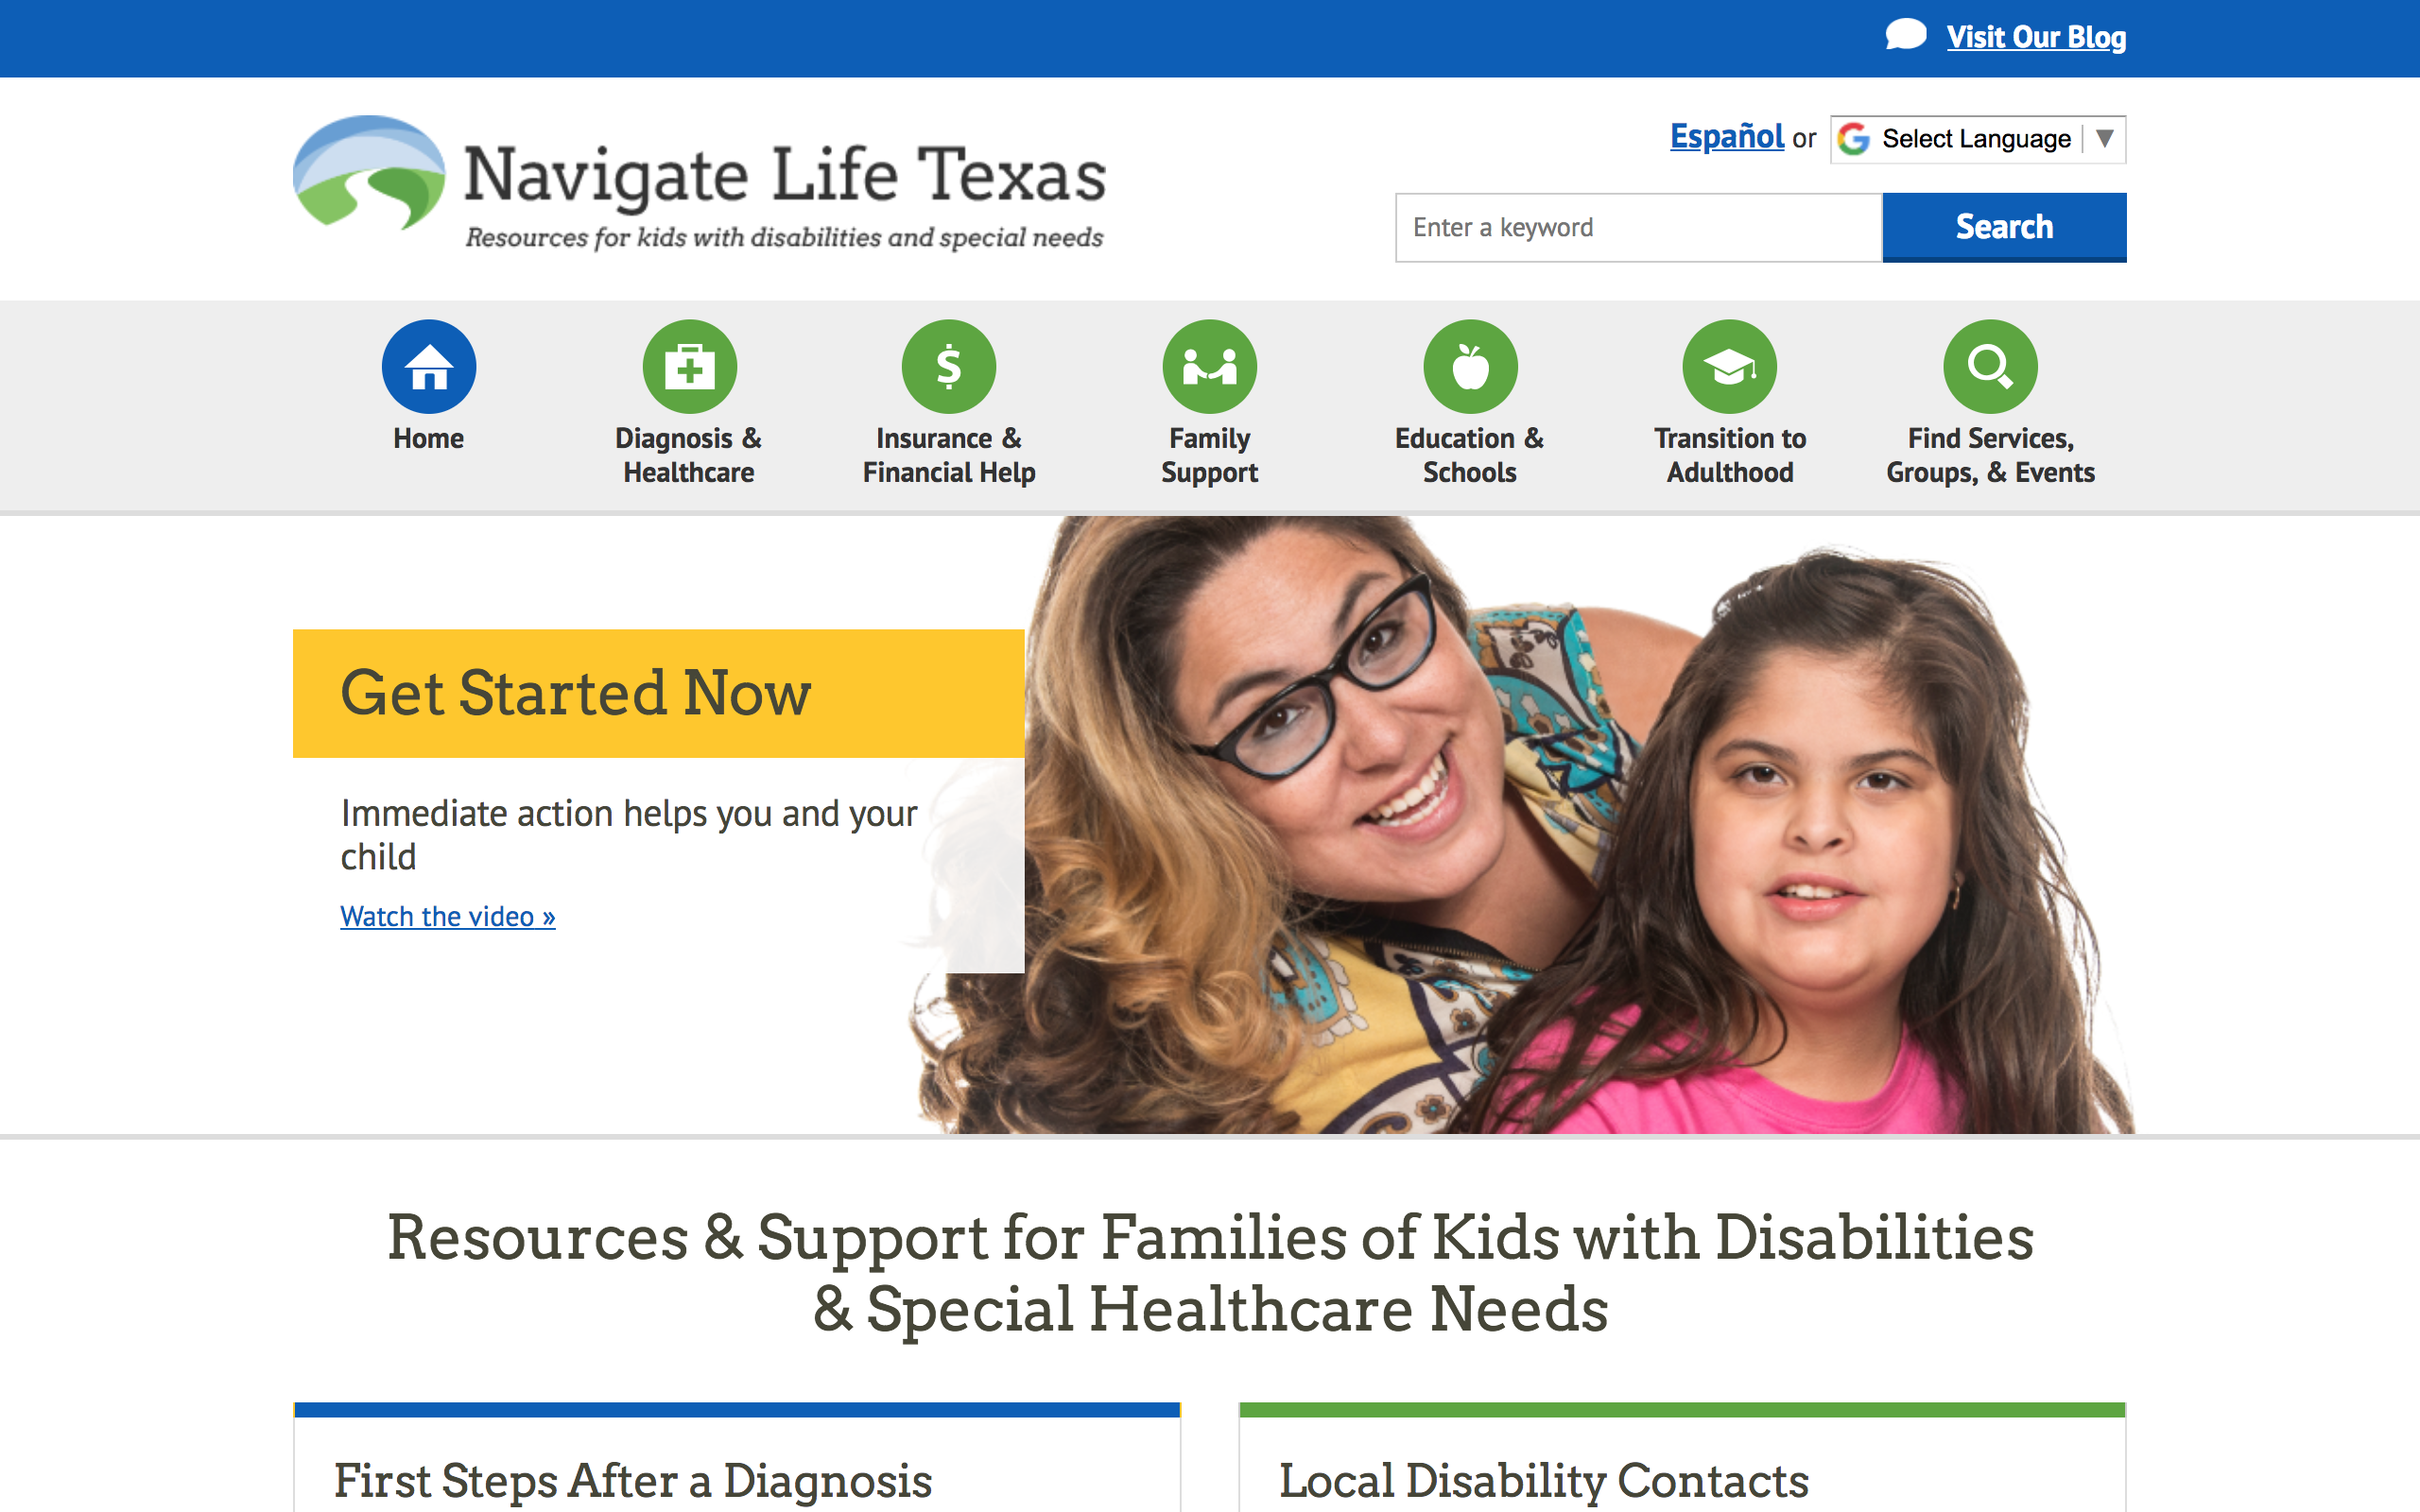 Navigate Life Texas homepage with a hero message that says "Resources & Support For Families of Kids with Disabilities & Special Healthcare Needs"